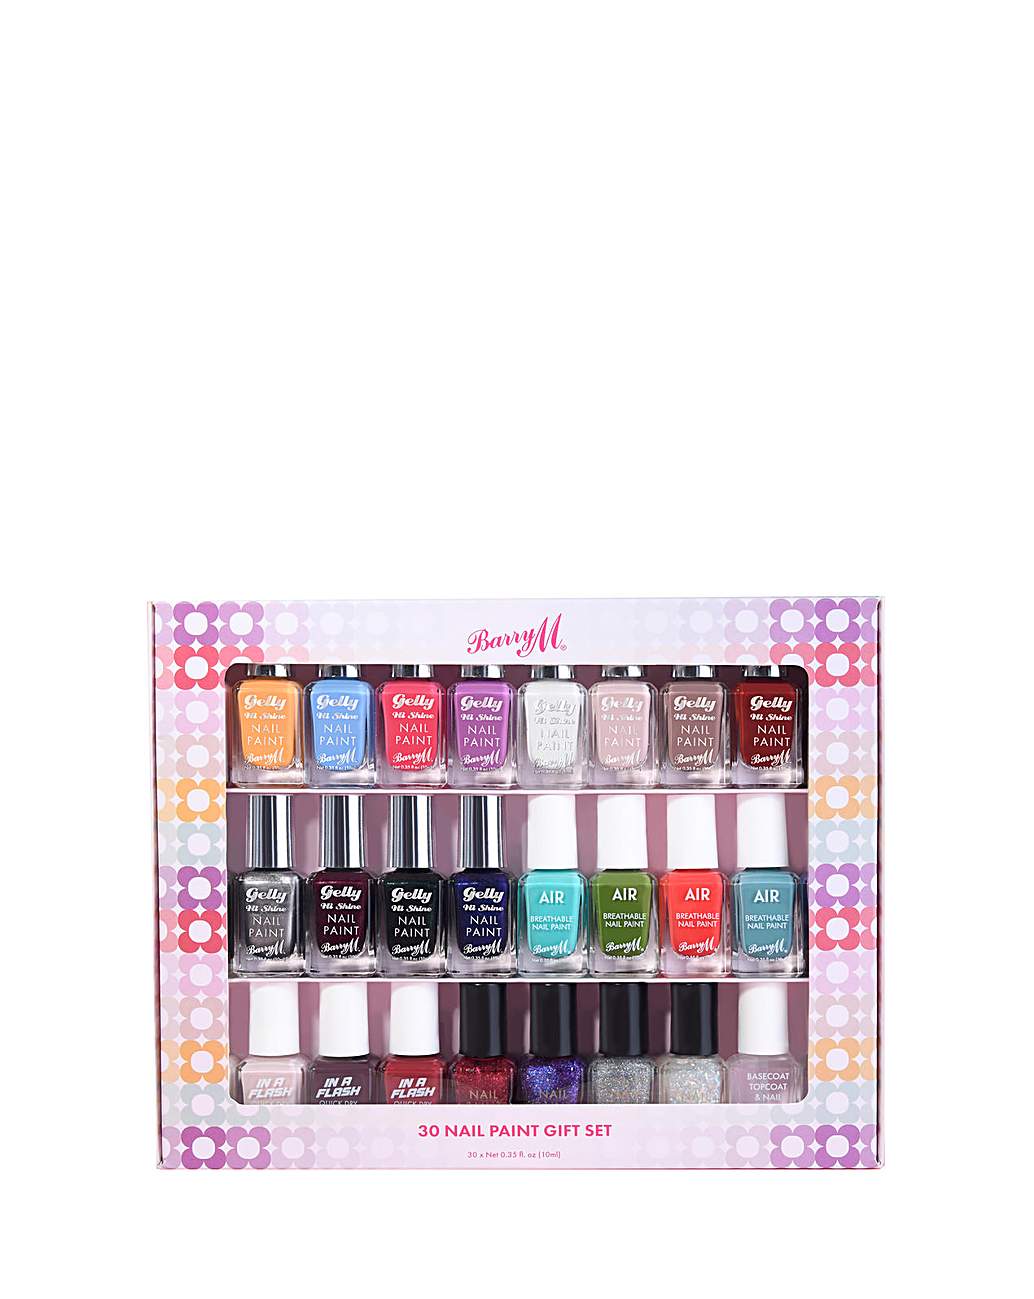 10 Best Nail Polish Gift Sets for Cute Christmas Manicures 2018